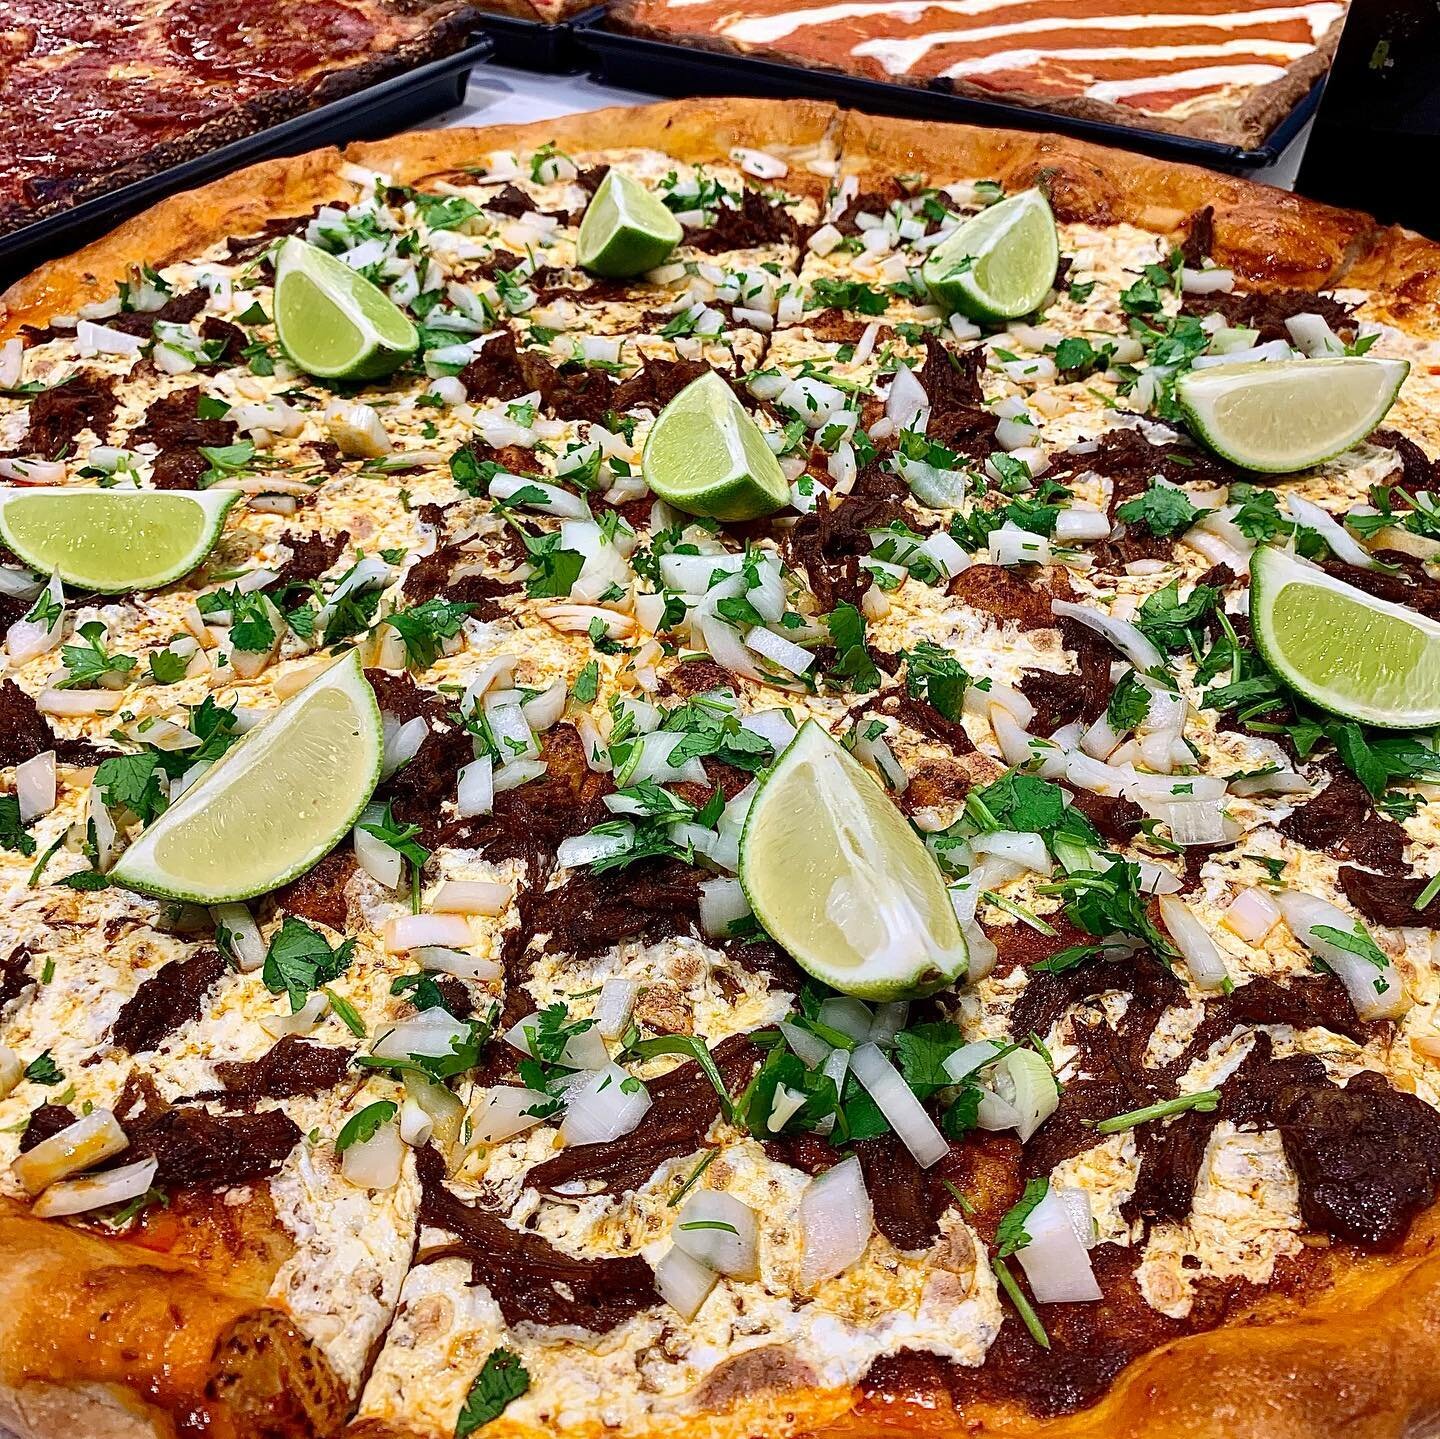 Come try our NEW #BIRRIAPIZZA !!!!
Served every Tuesday. Delicious slowly braised angus short rib with Oaxaca cheese, cilantro and fresh onions!!!
#nypizza #nyslice #pizza #nycfoodcoma #fidi #fidinyc #tacotuesday